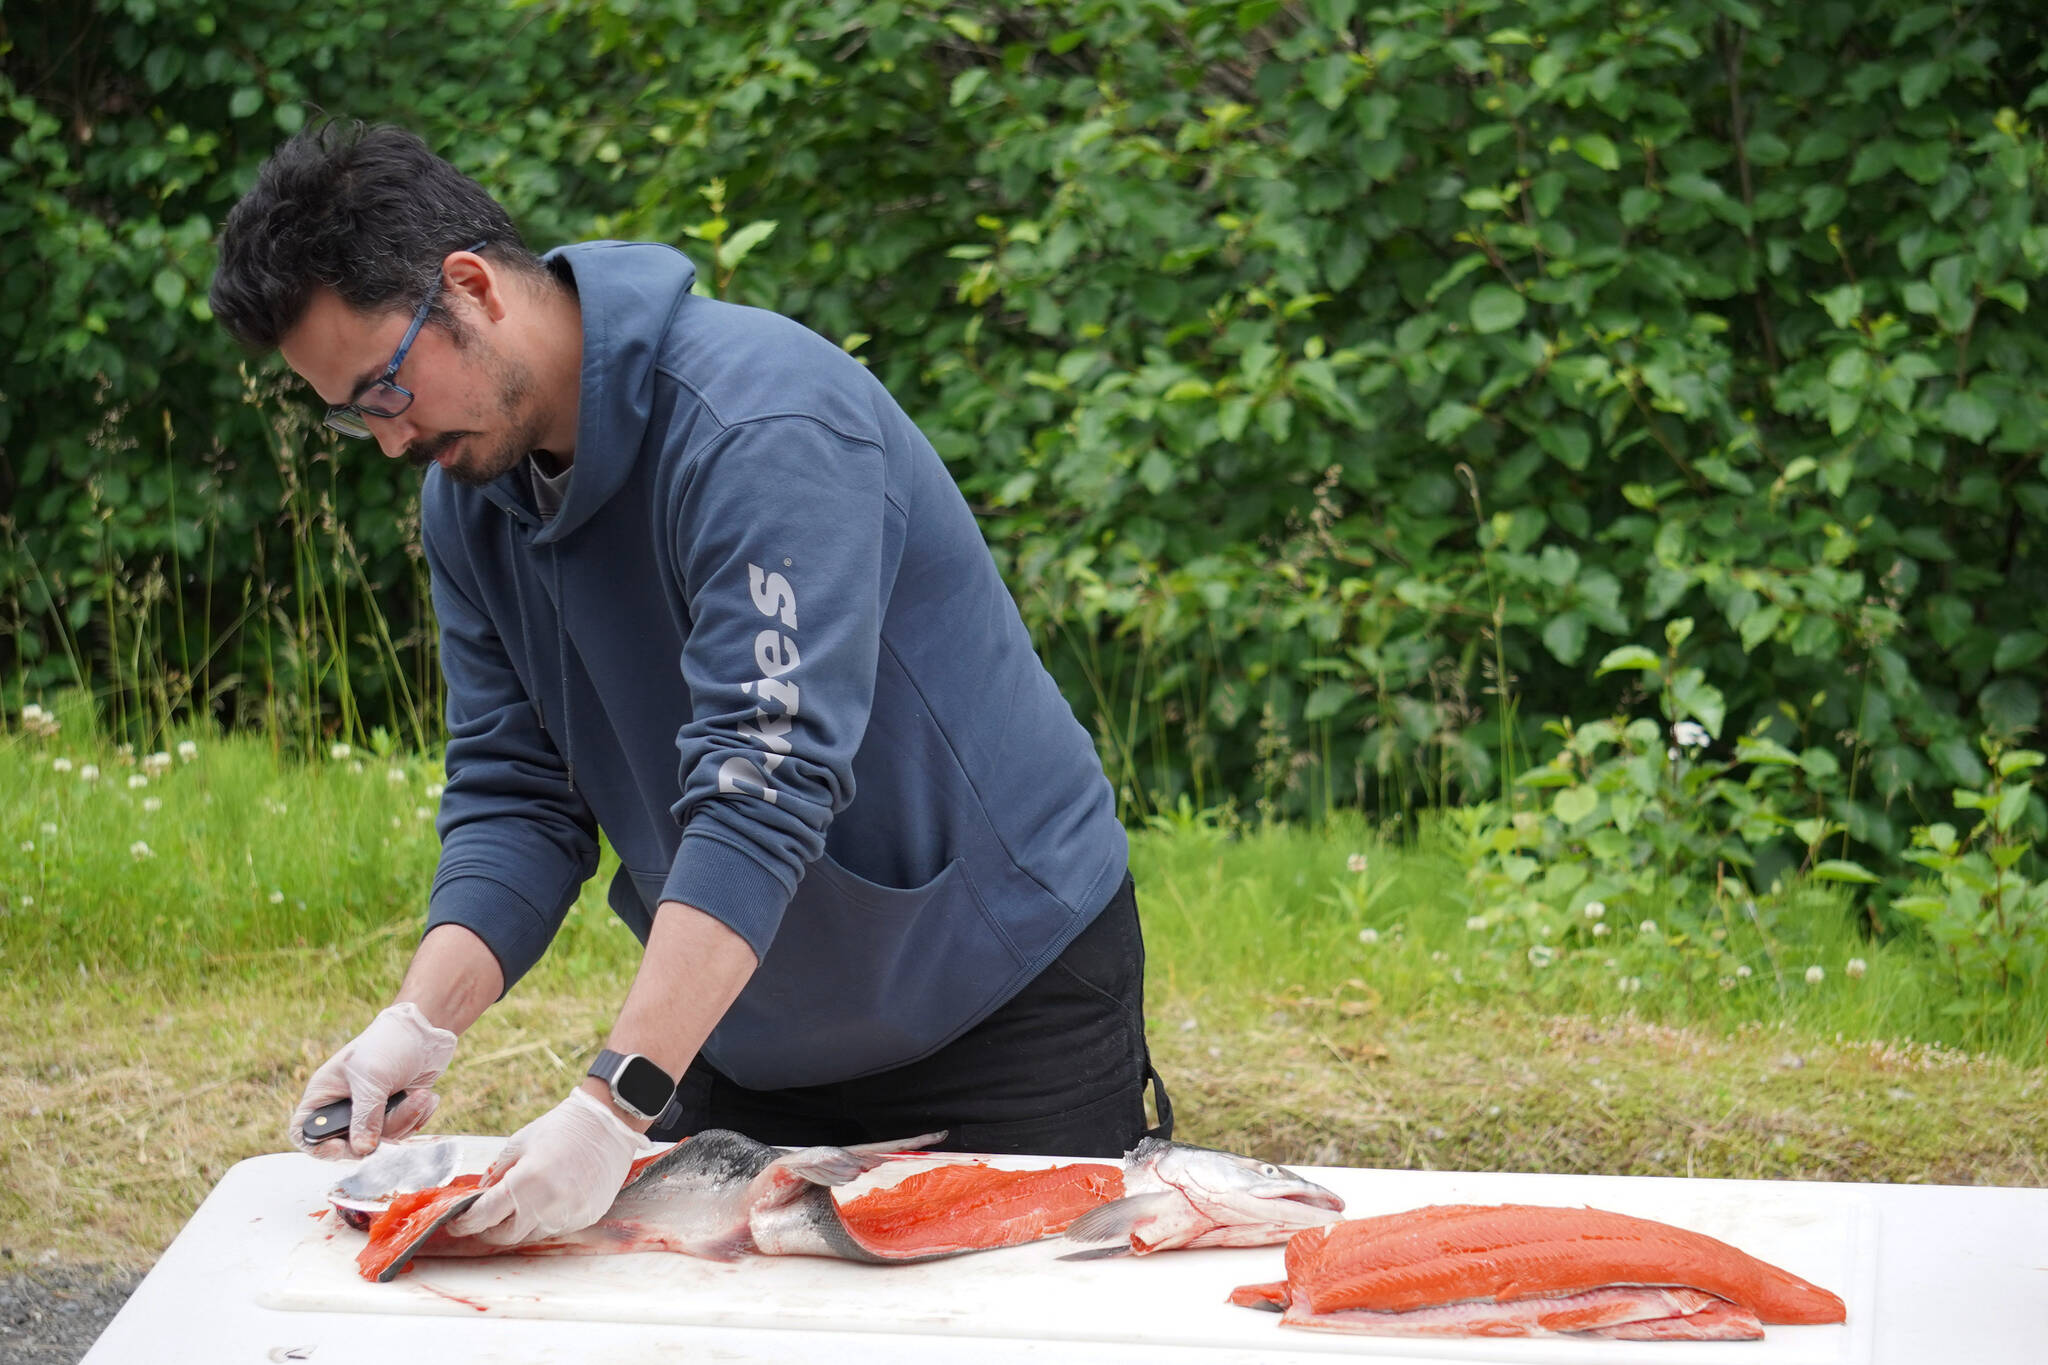 James Wardlow demonstrates filleting a salmon with an ulu during a smoked salmon demonstration, part of Fish Week 2023, on Wednesday, July 19, 2023, at the Kenai National Wildlife Refuge Visitor Center in Soldotna, Alaska. (Jake Dye/Peninsula Clarion)